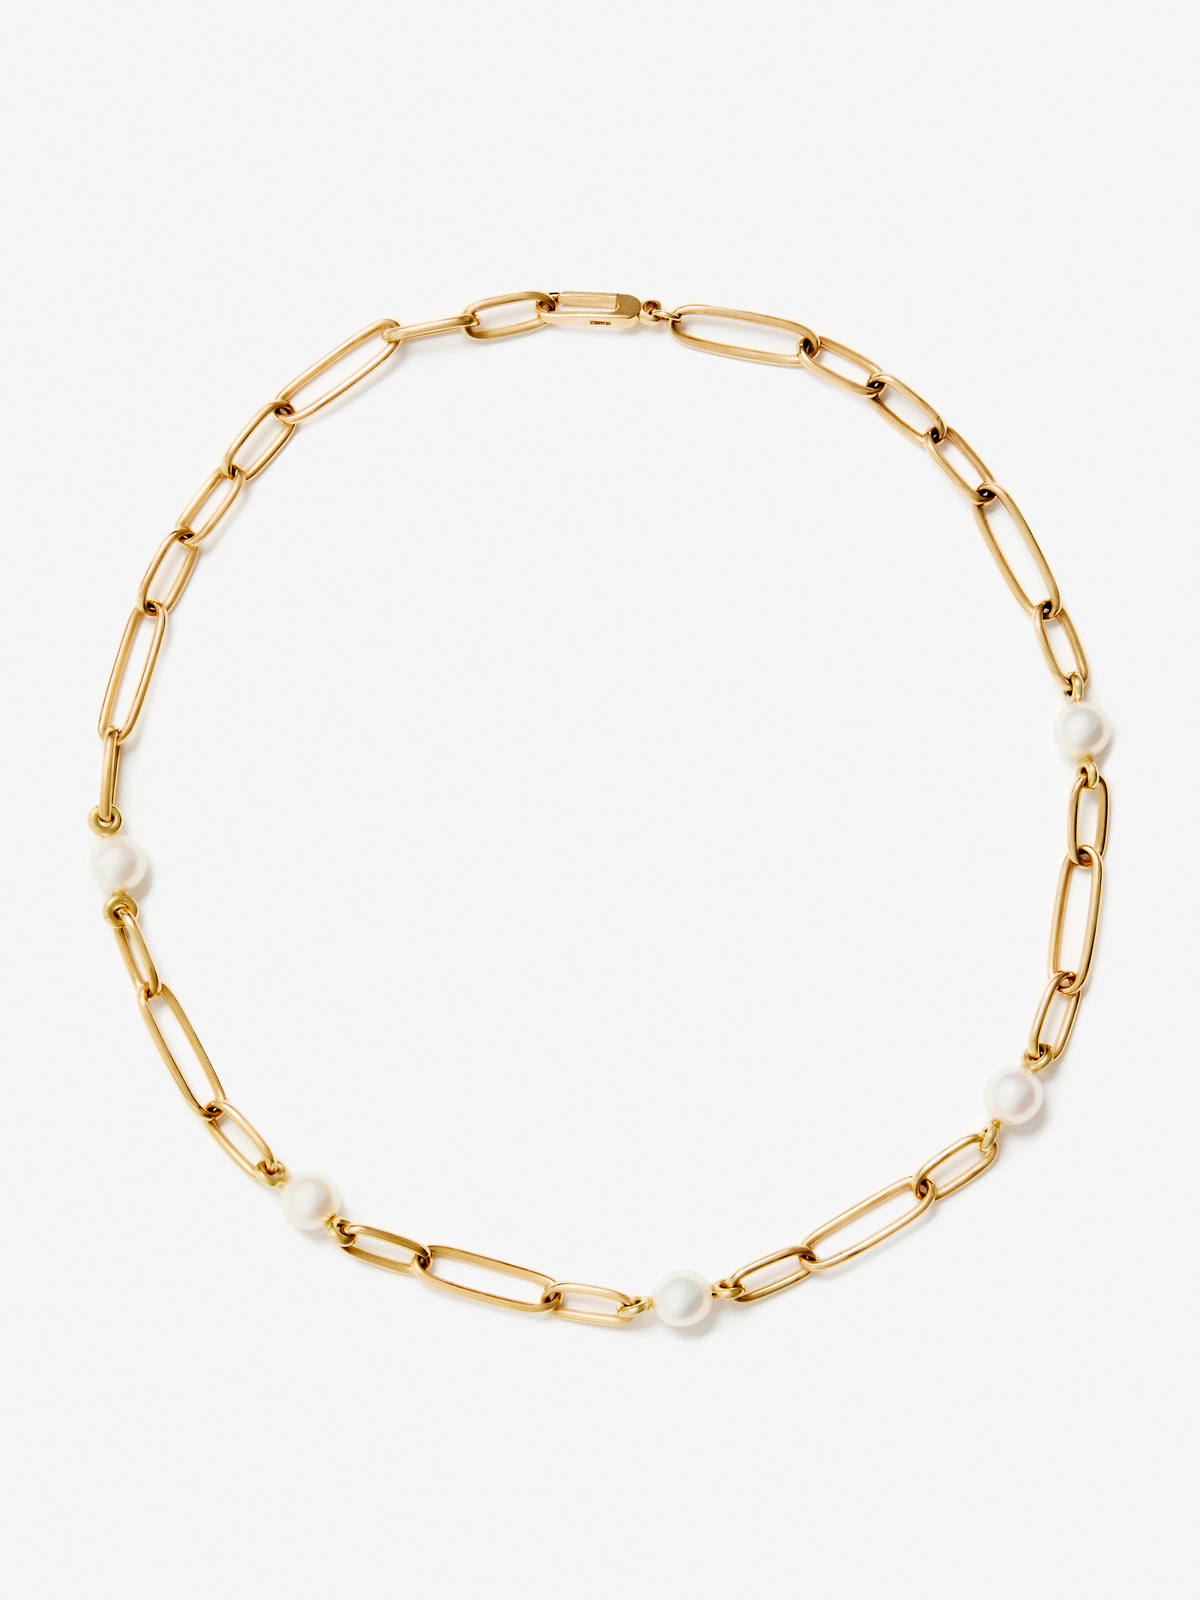 18K yellow gold link necklace with 5 8mm akoya pearls